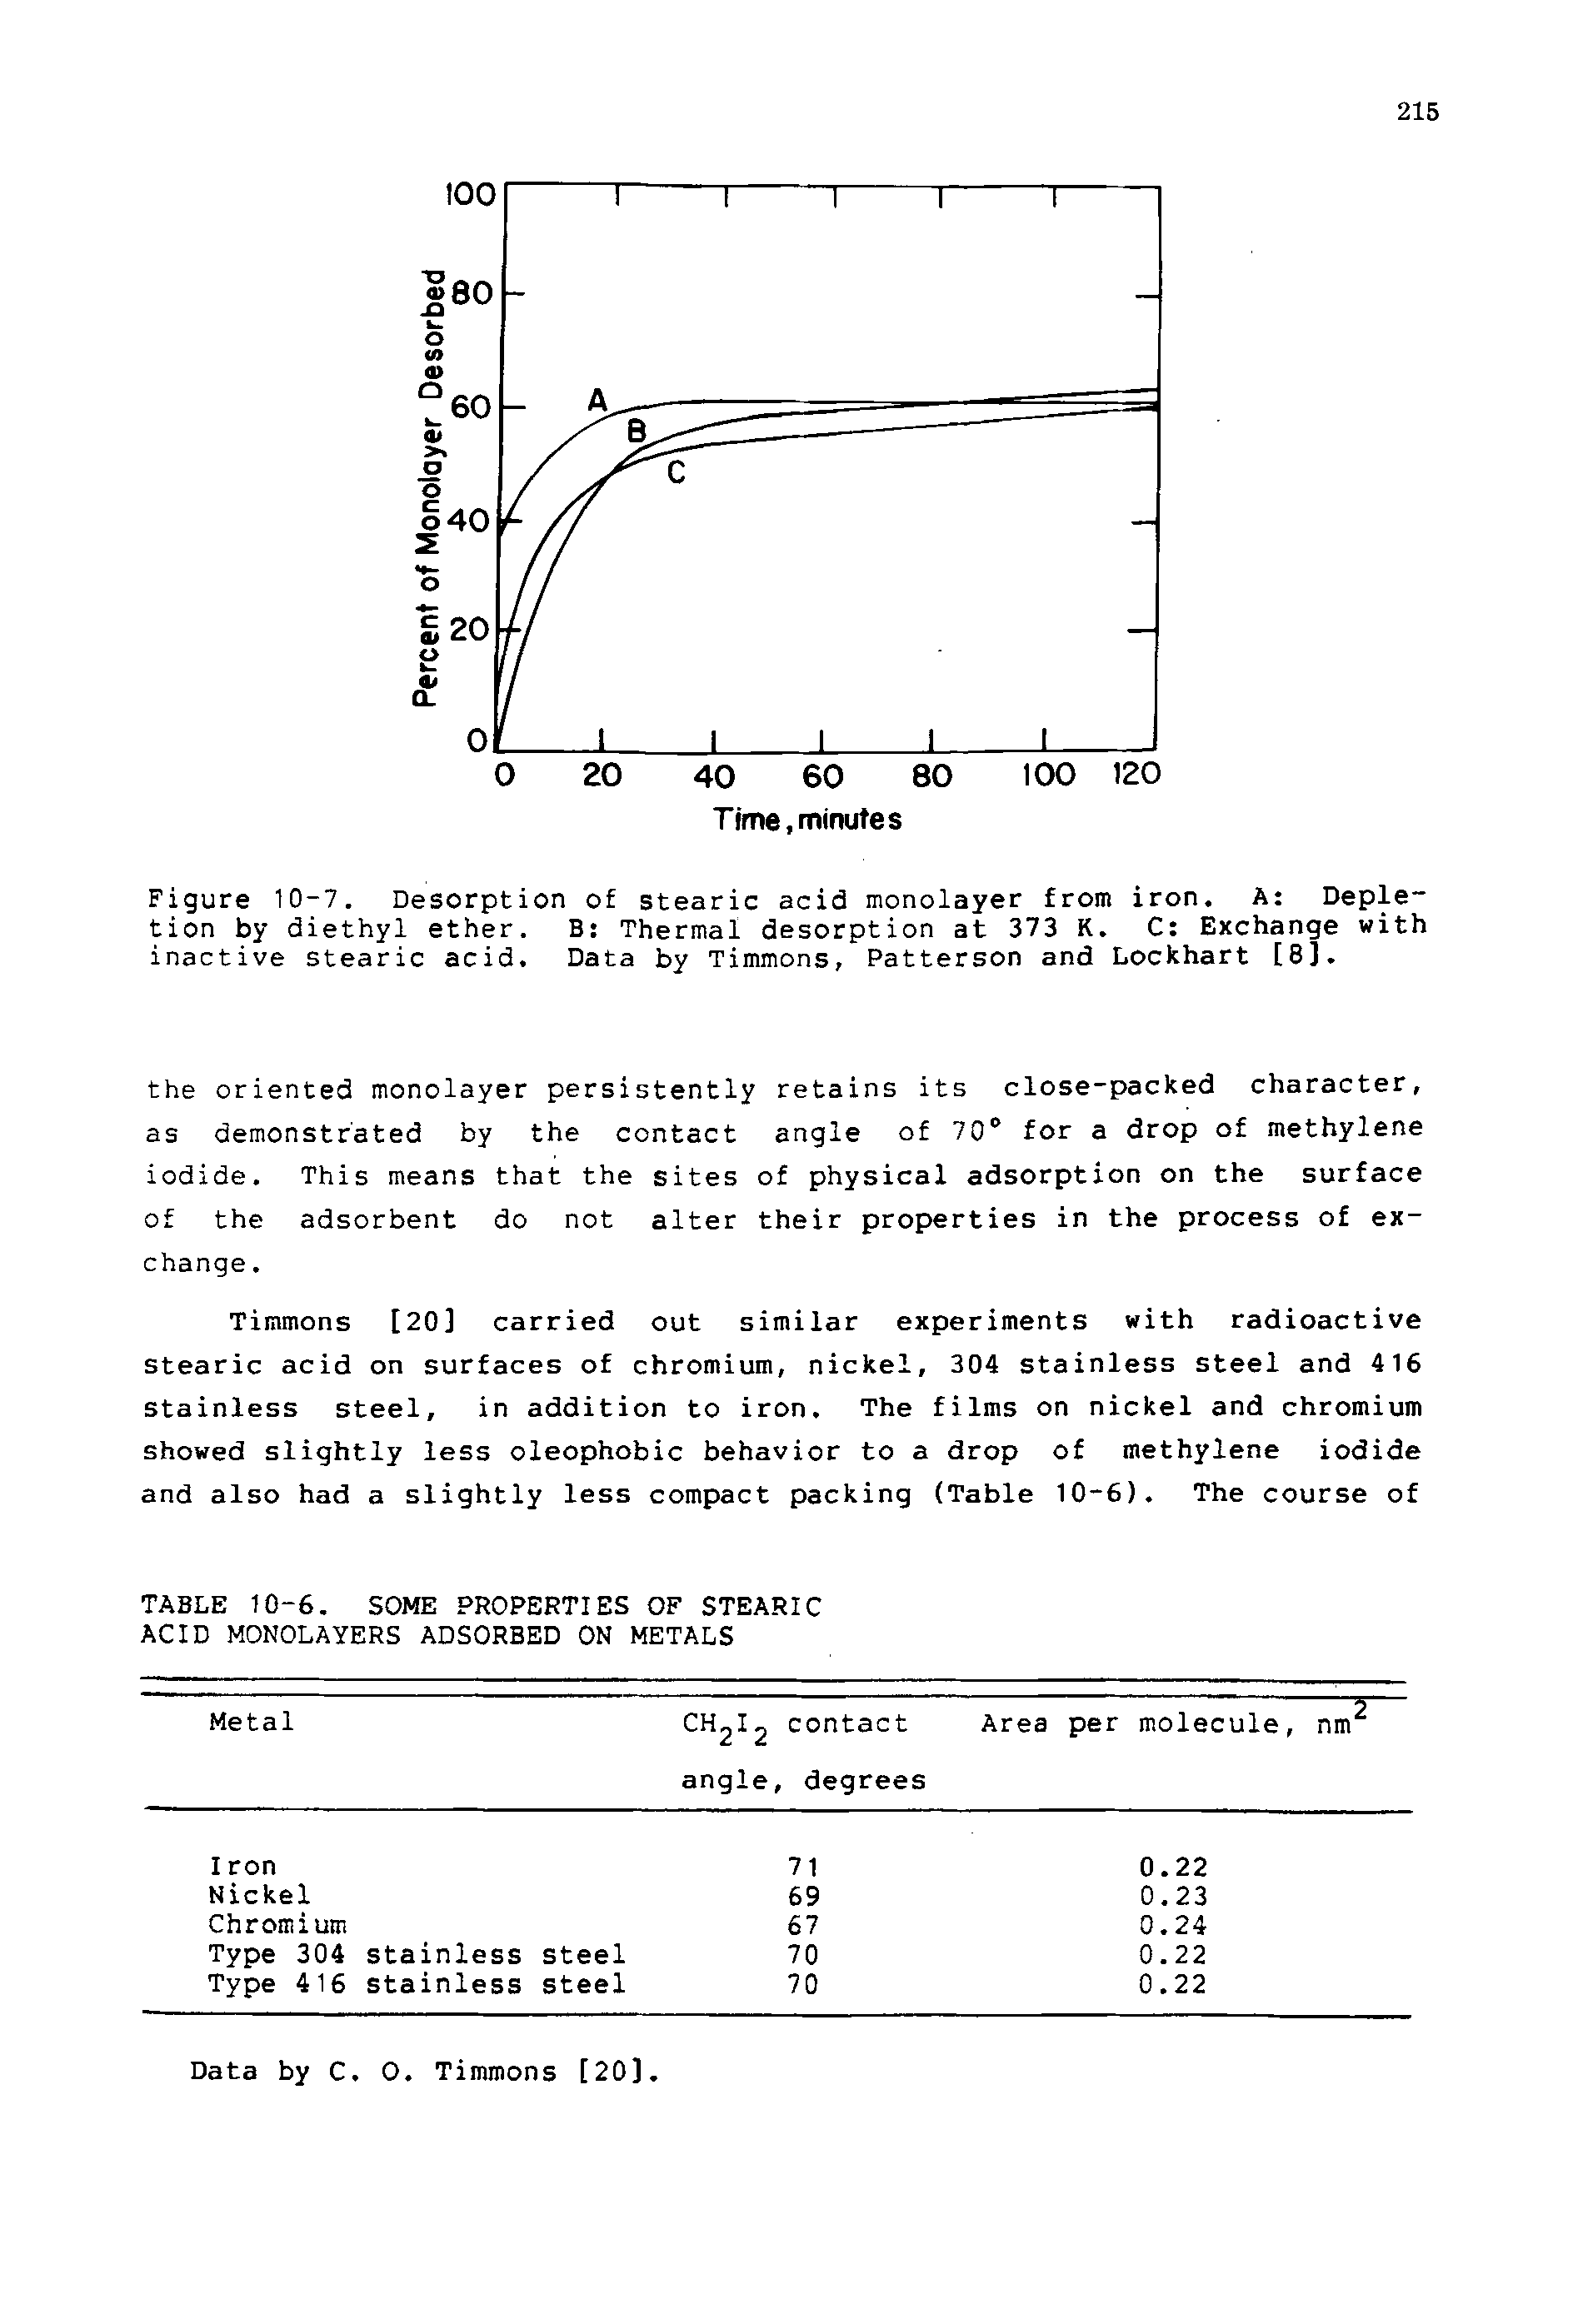 Figure 10-7. Desorption of stearic acid monolayer from iron. A Depletion by diethyl ether. B Thermal desorption at 373 K. C Exchange with inactive stearic acid. Data by Timmons, Patterson and Lockhart [8].